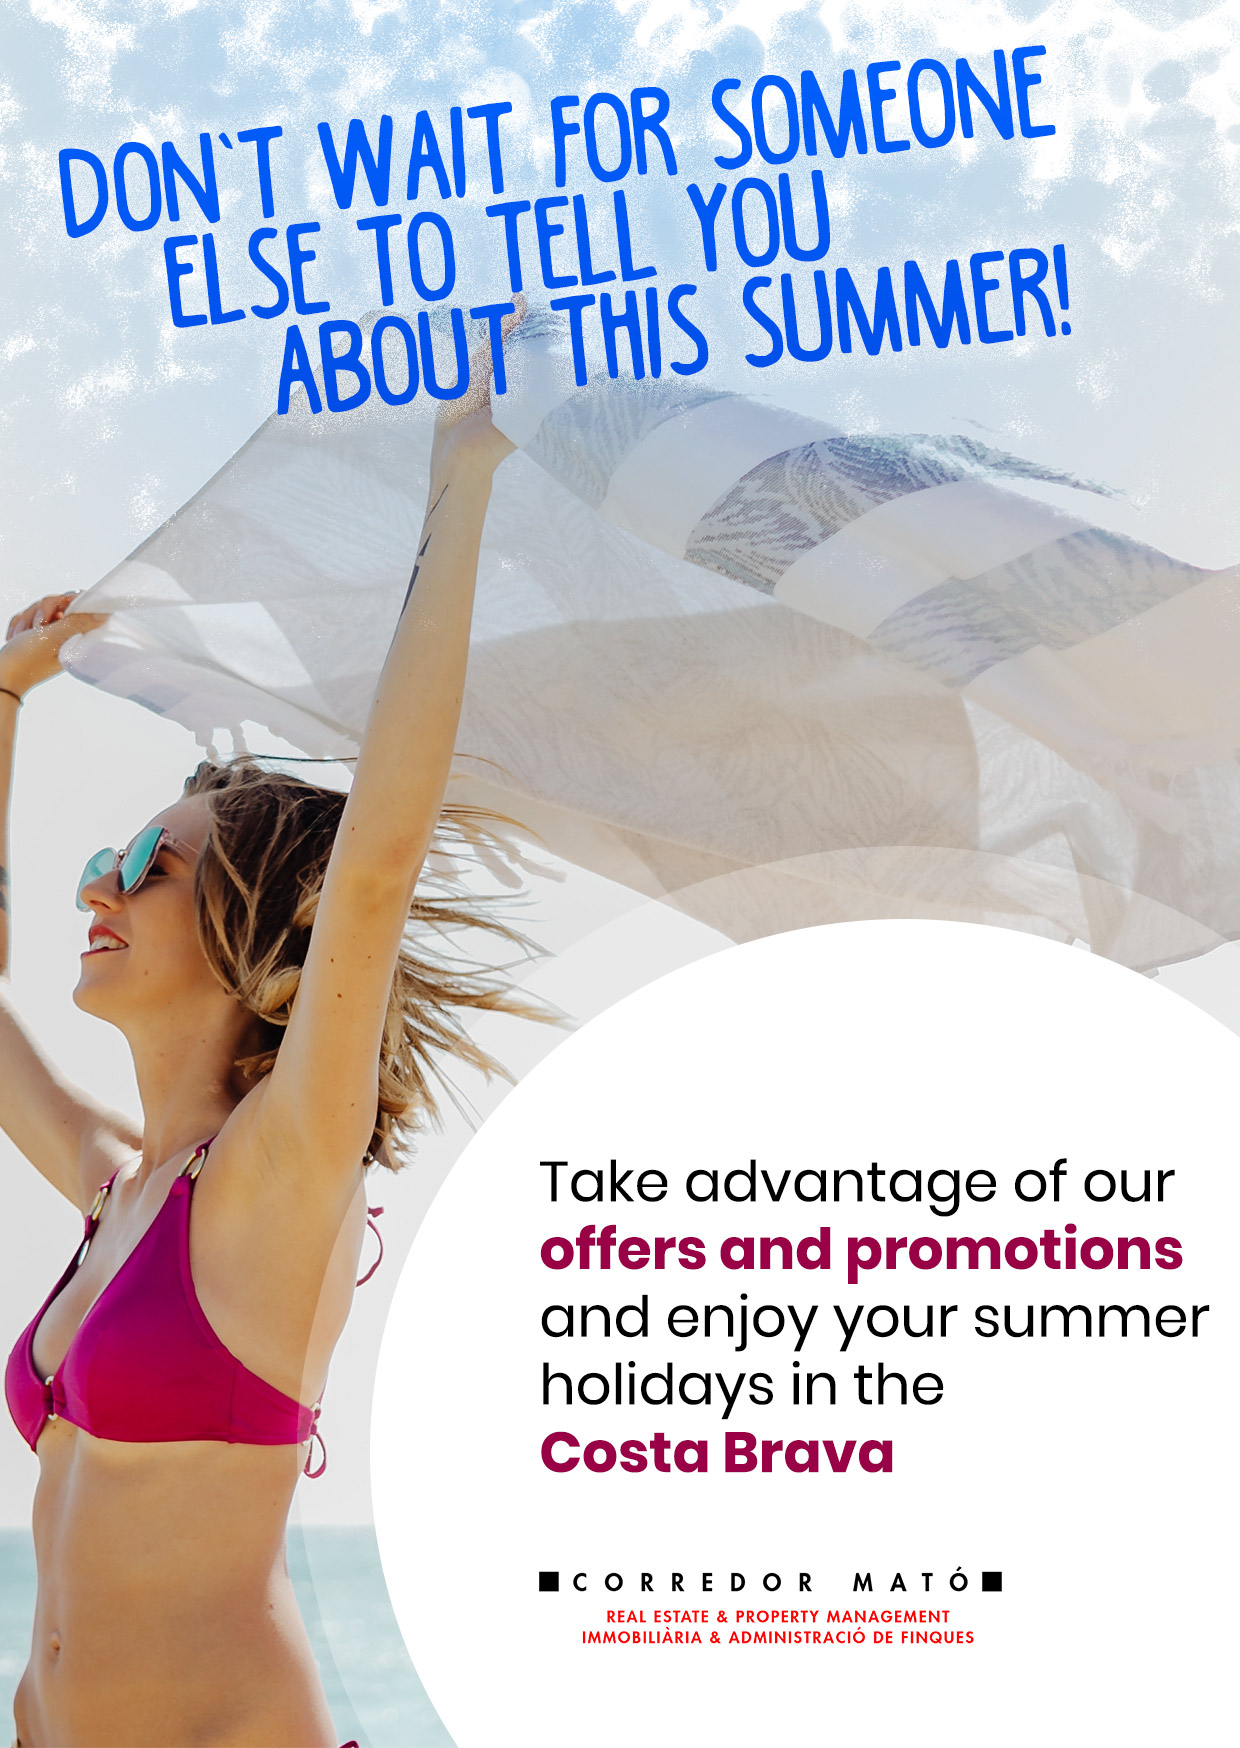 Take advantage of our offers and promotions and enjoy a holiday on the Costa Brava!